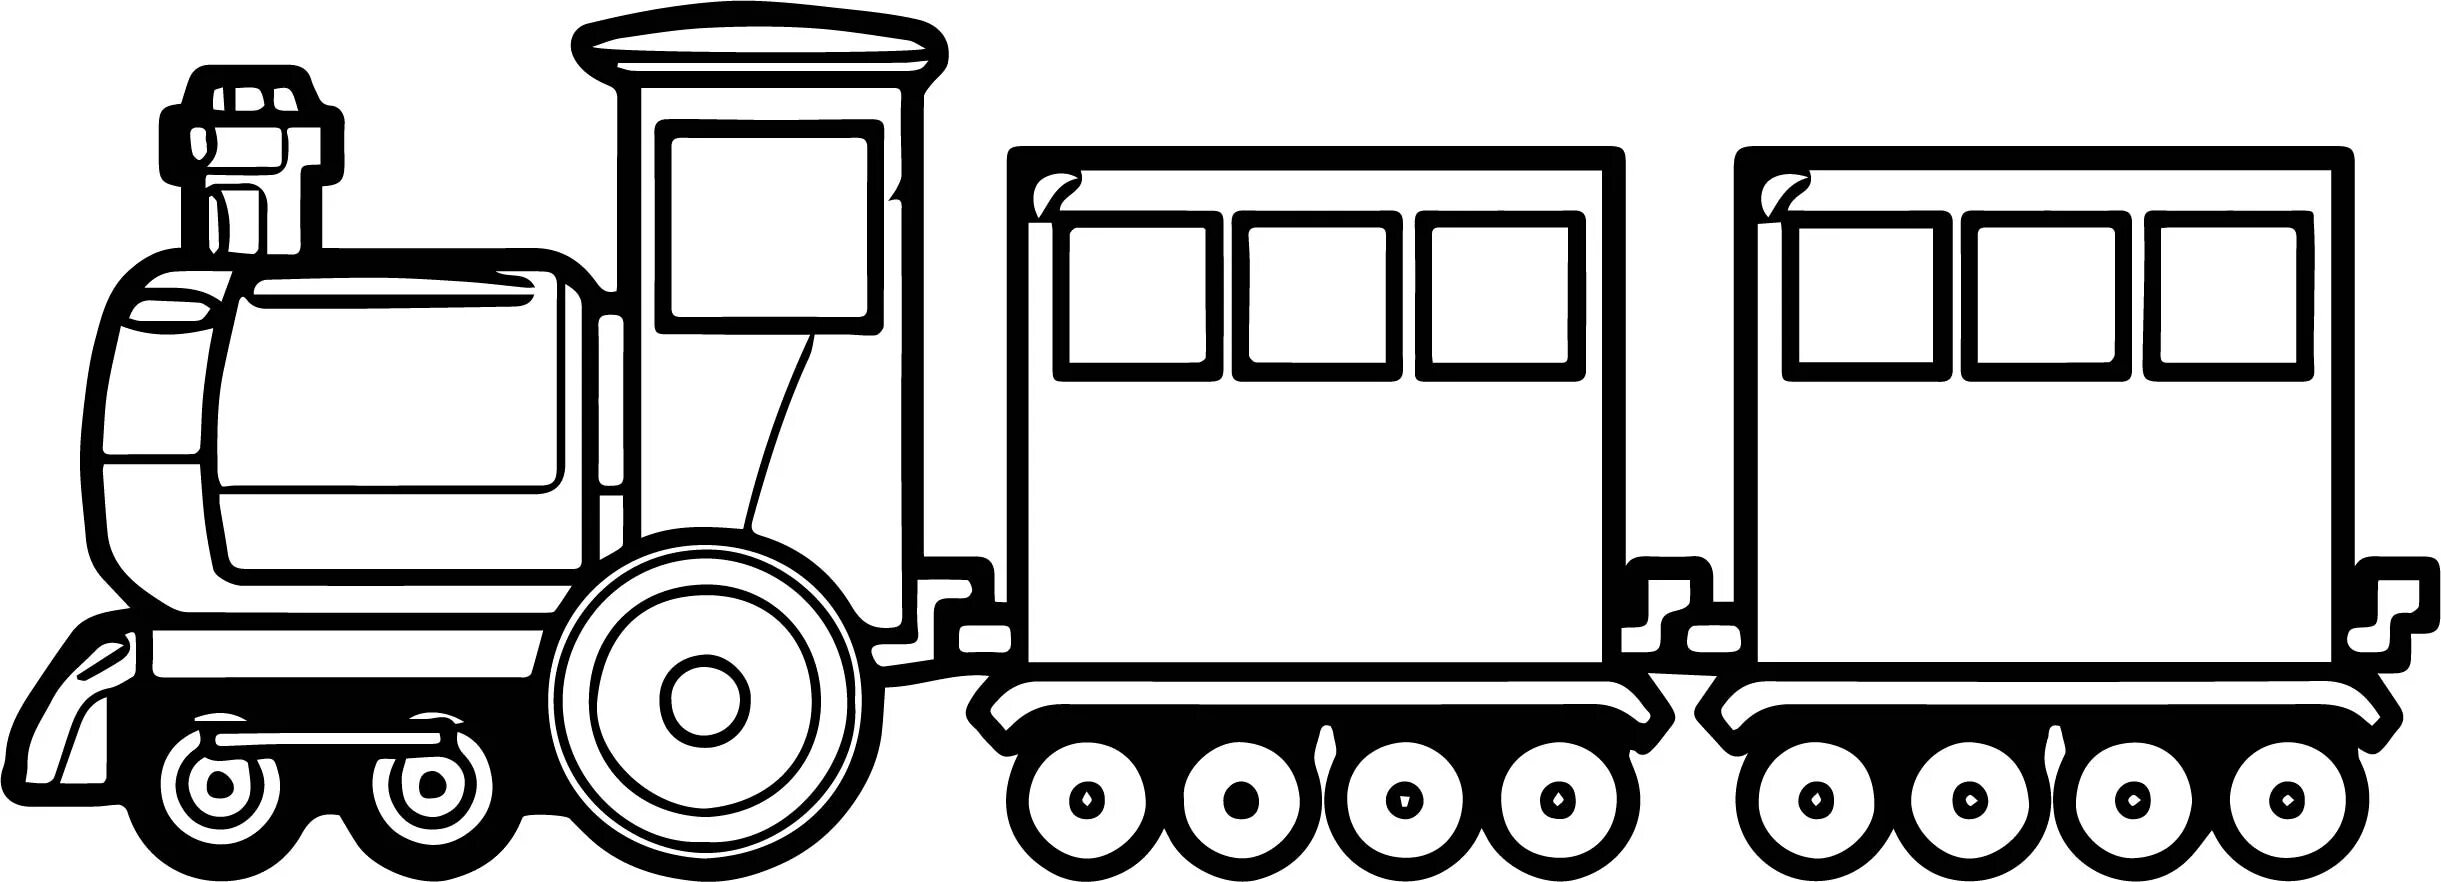 Train with wagons for children #4